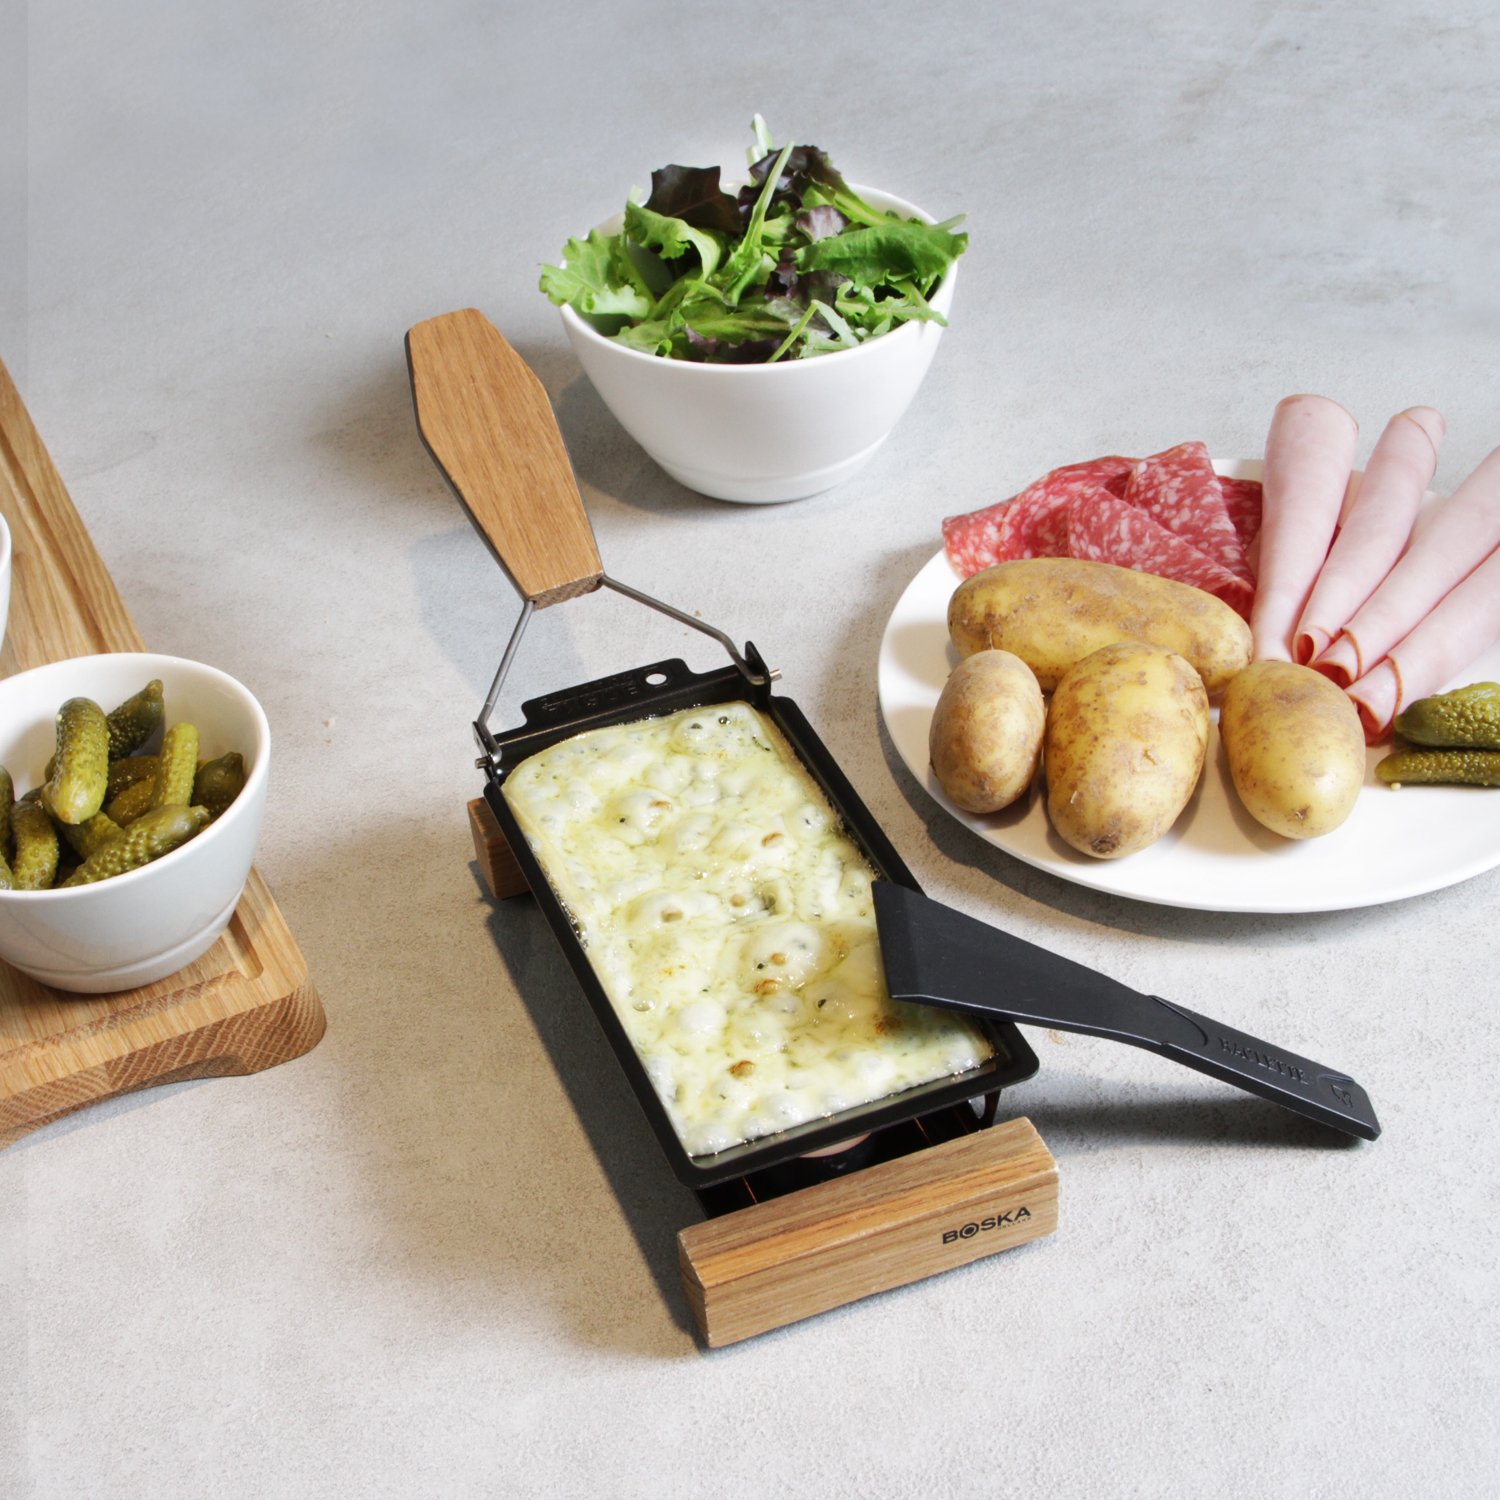 Portable Raclette for Melting Cheese